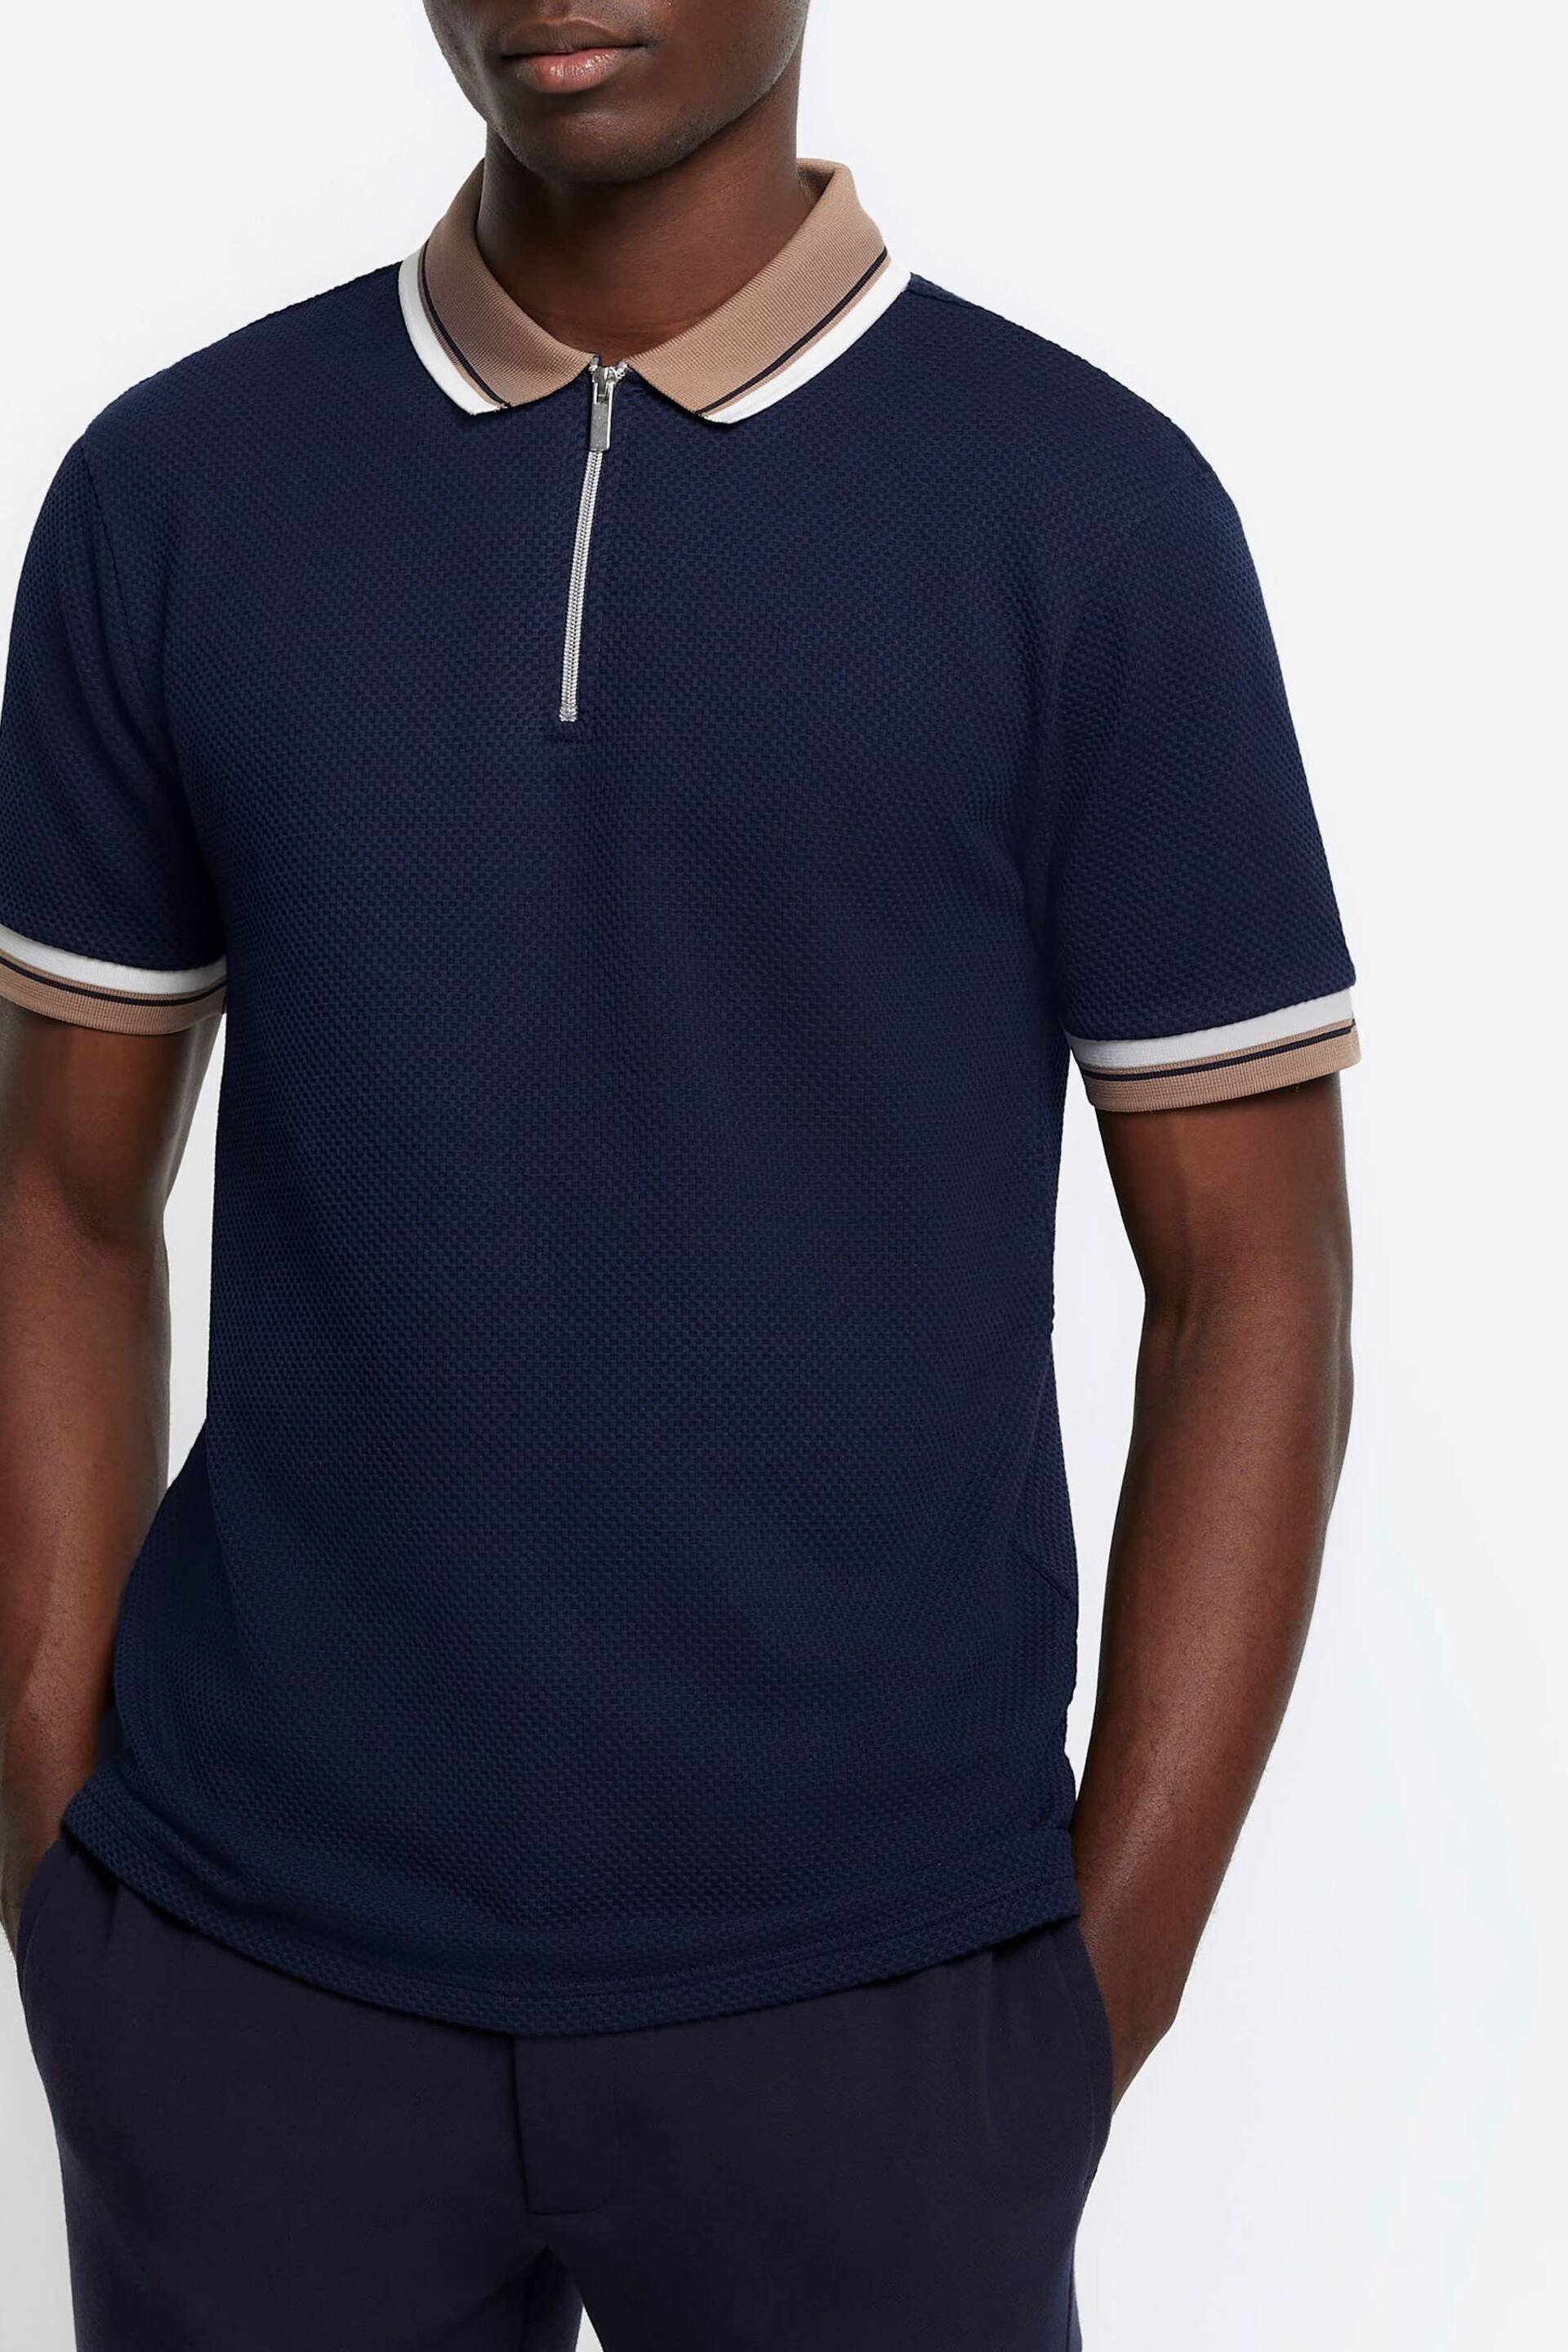 River Island Blue Tap Contrast Collar Regular Fit Polo Shirt - Image 3 of 4